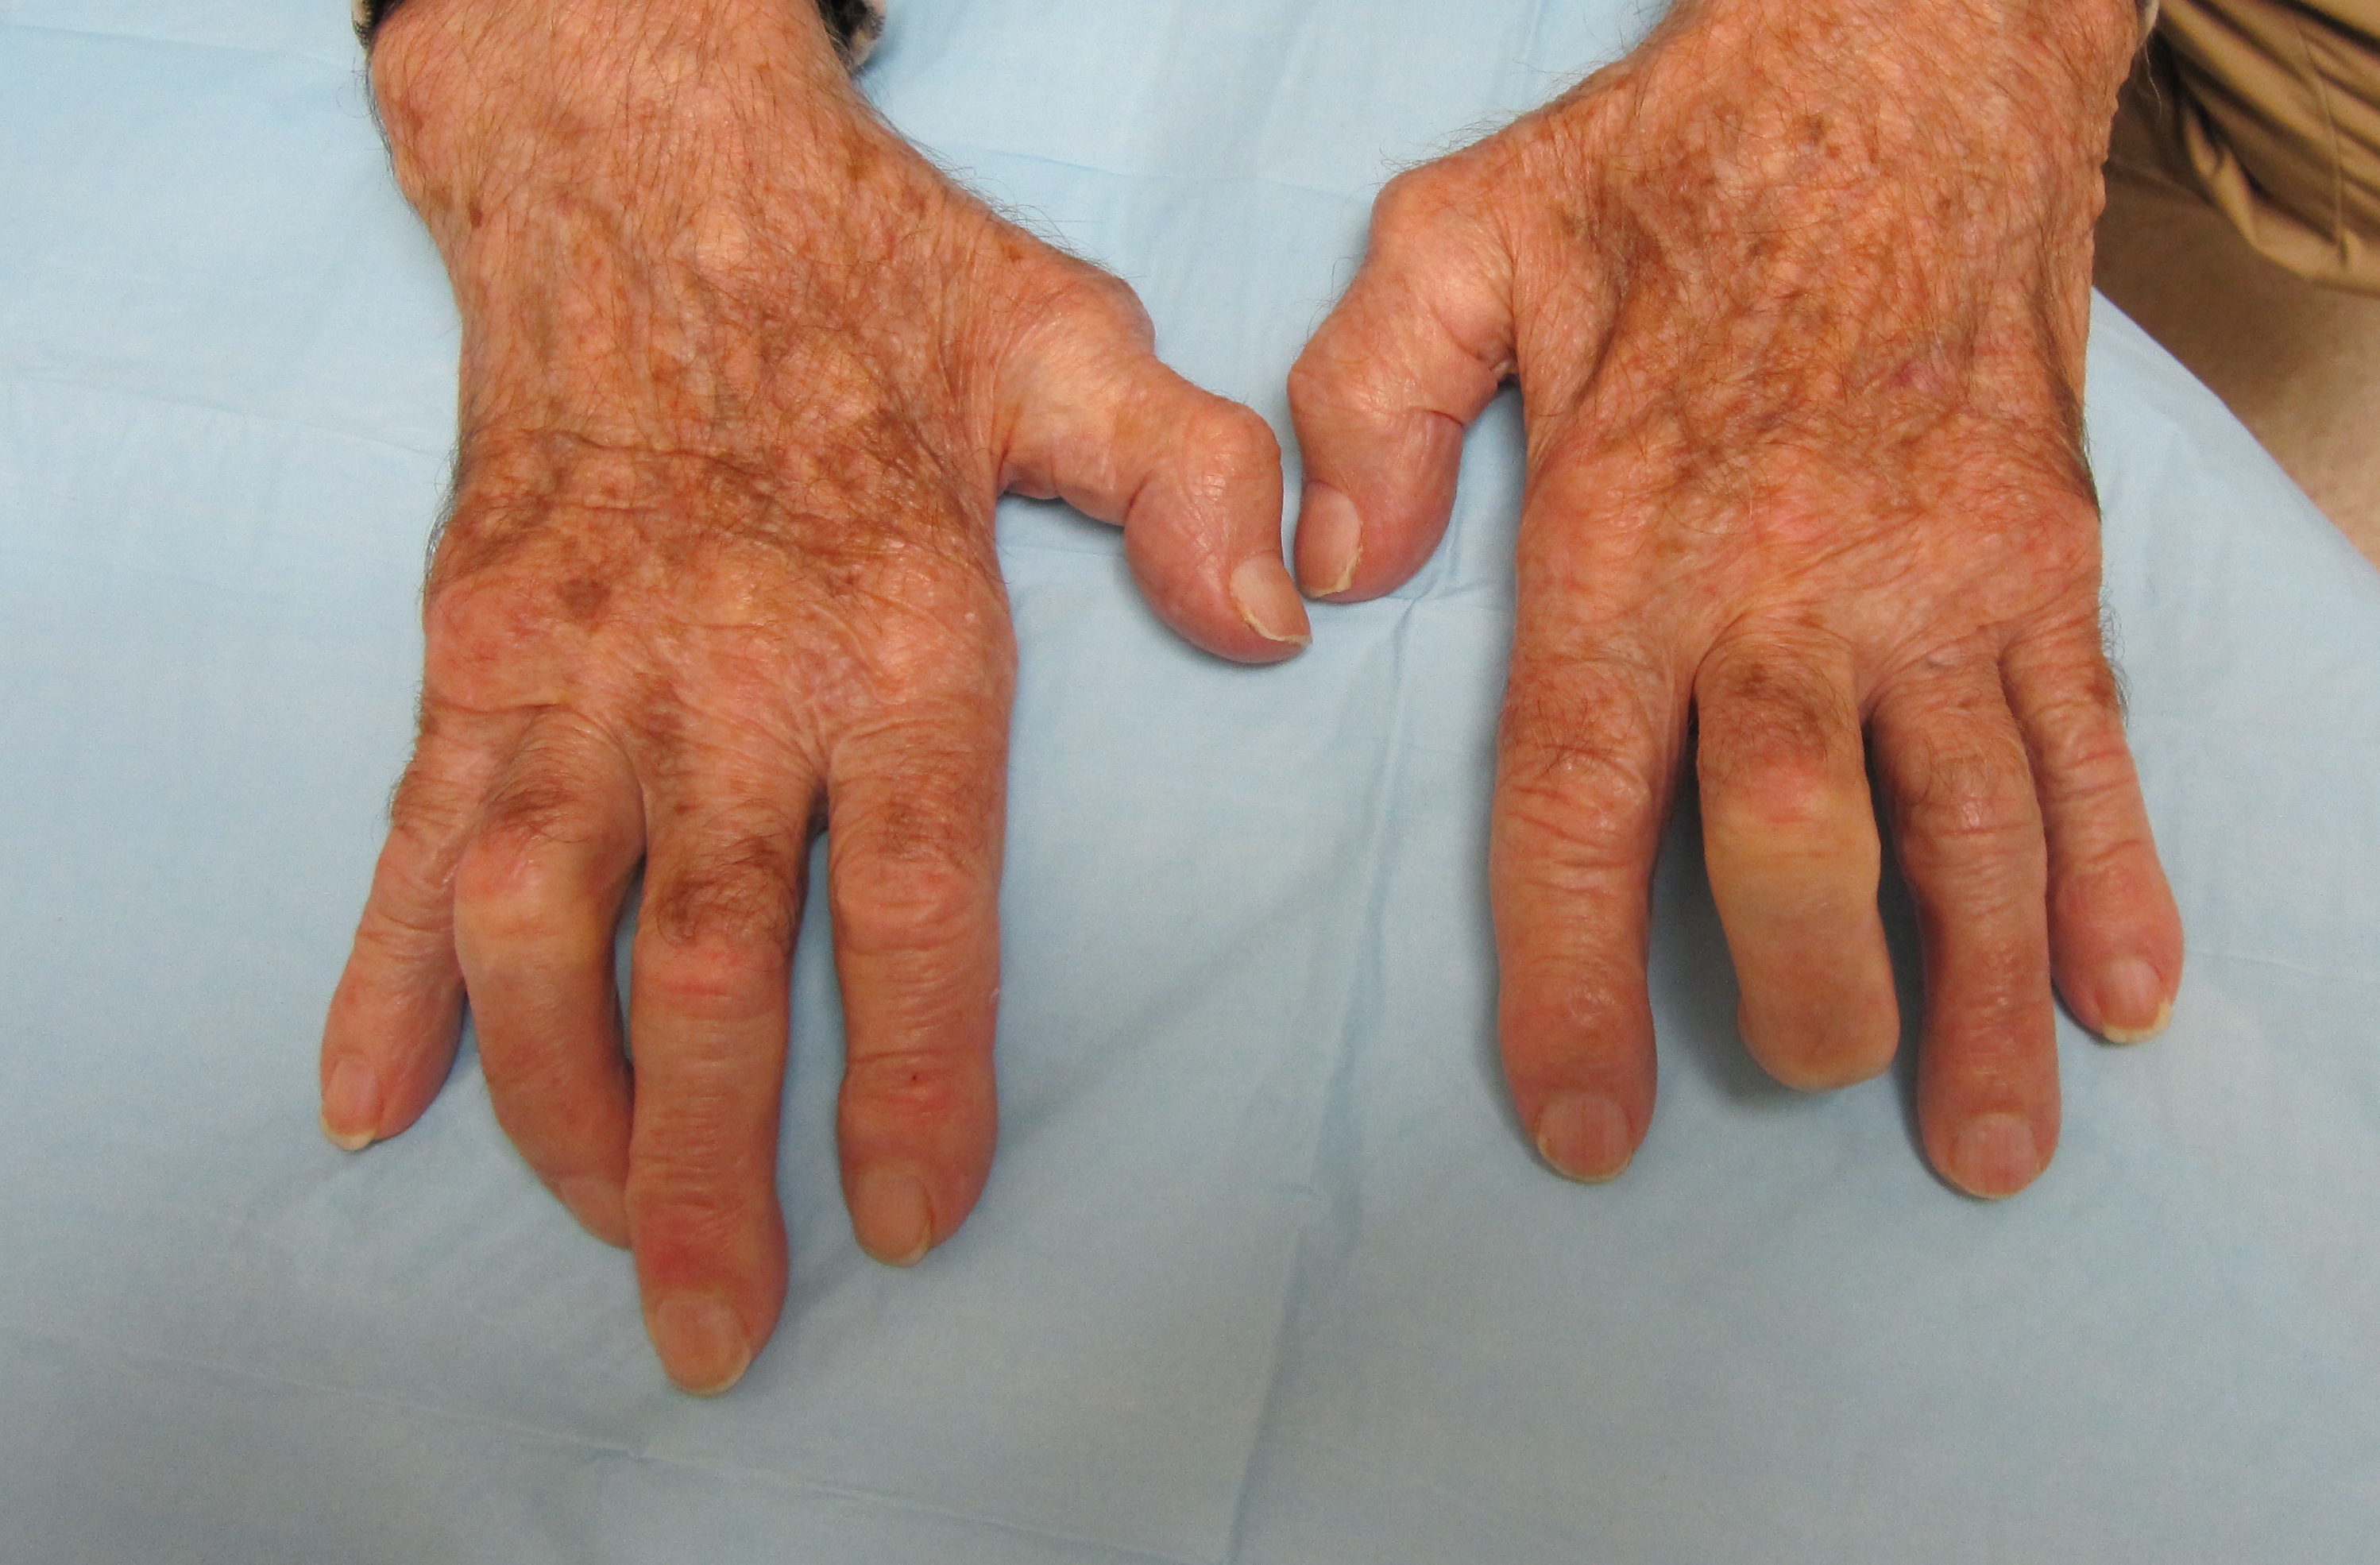 Severe diffuse bilateral hand Osteoarthritis in patient with severe cubital tunnel syndromes.